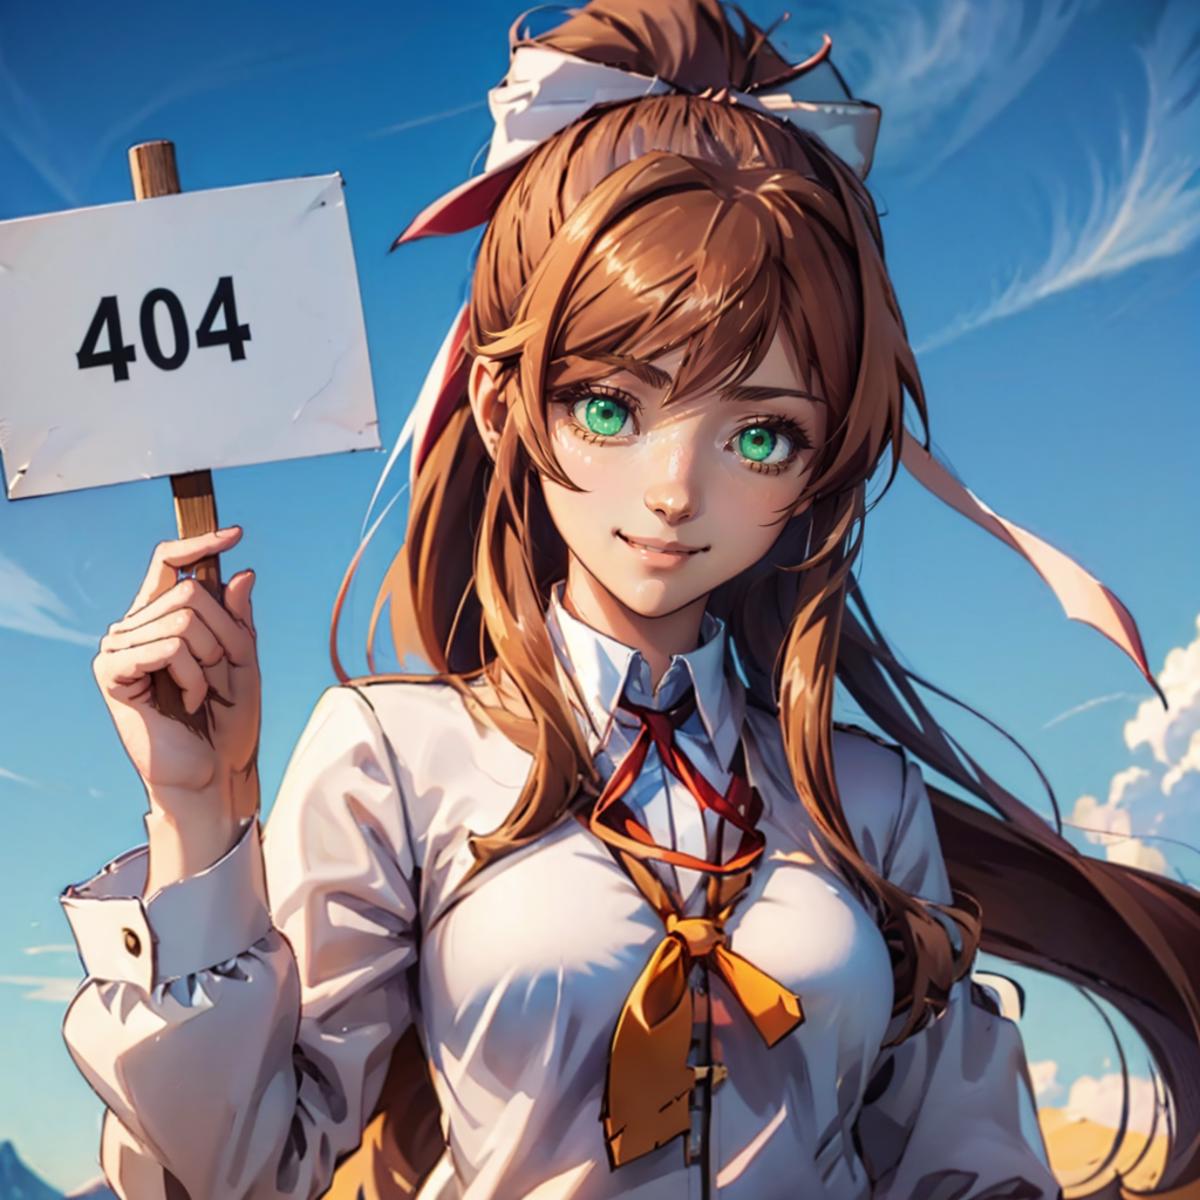 Cartoon Woman Holding a 404 Sign with Green Eyes.